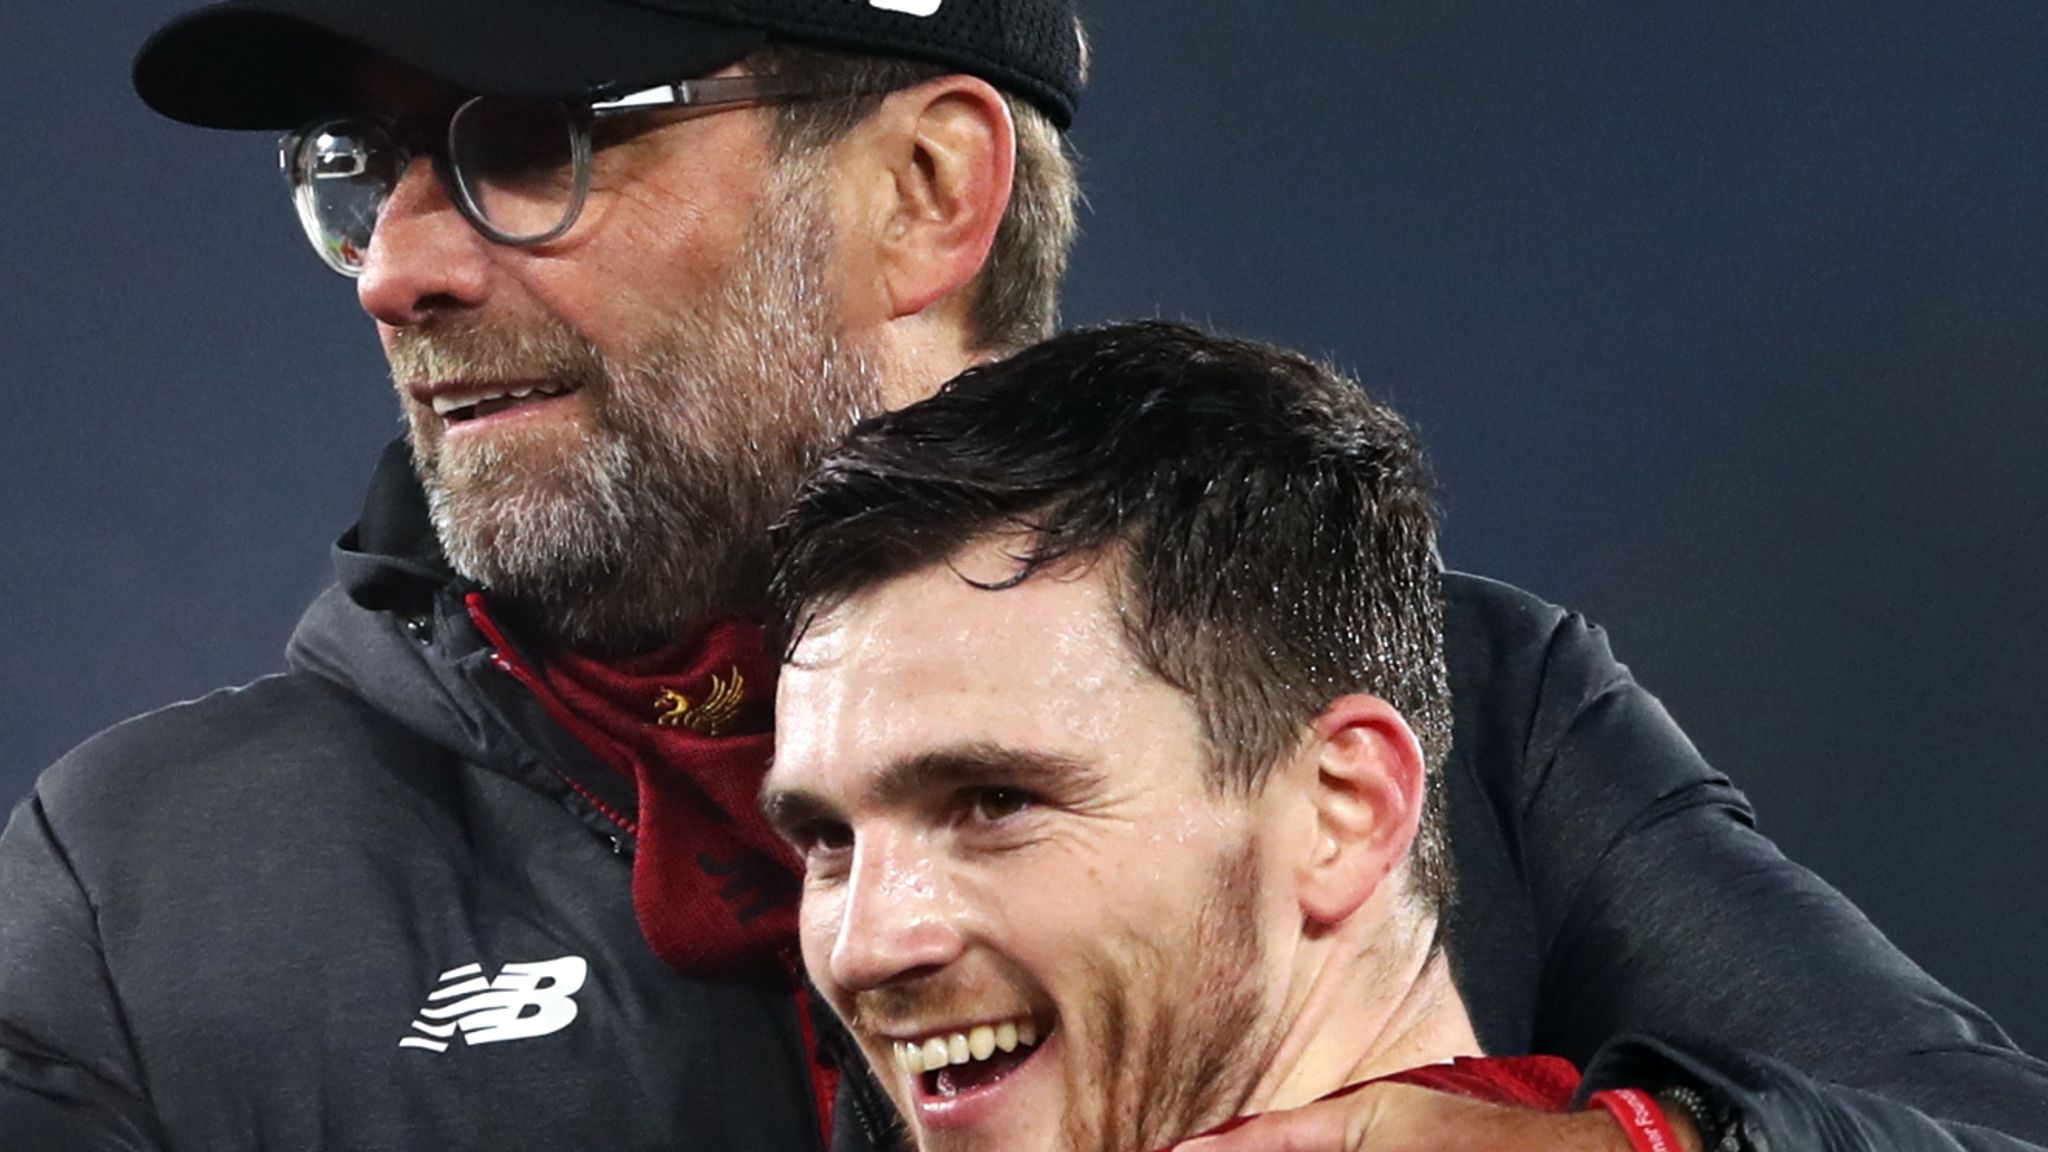 Jurgen Klopp is ahead of the game: Why empathy will be biggest